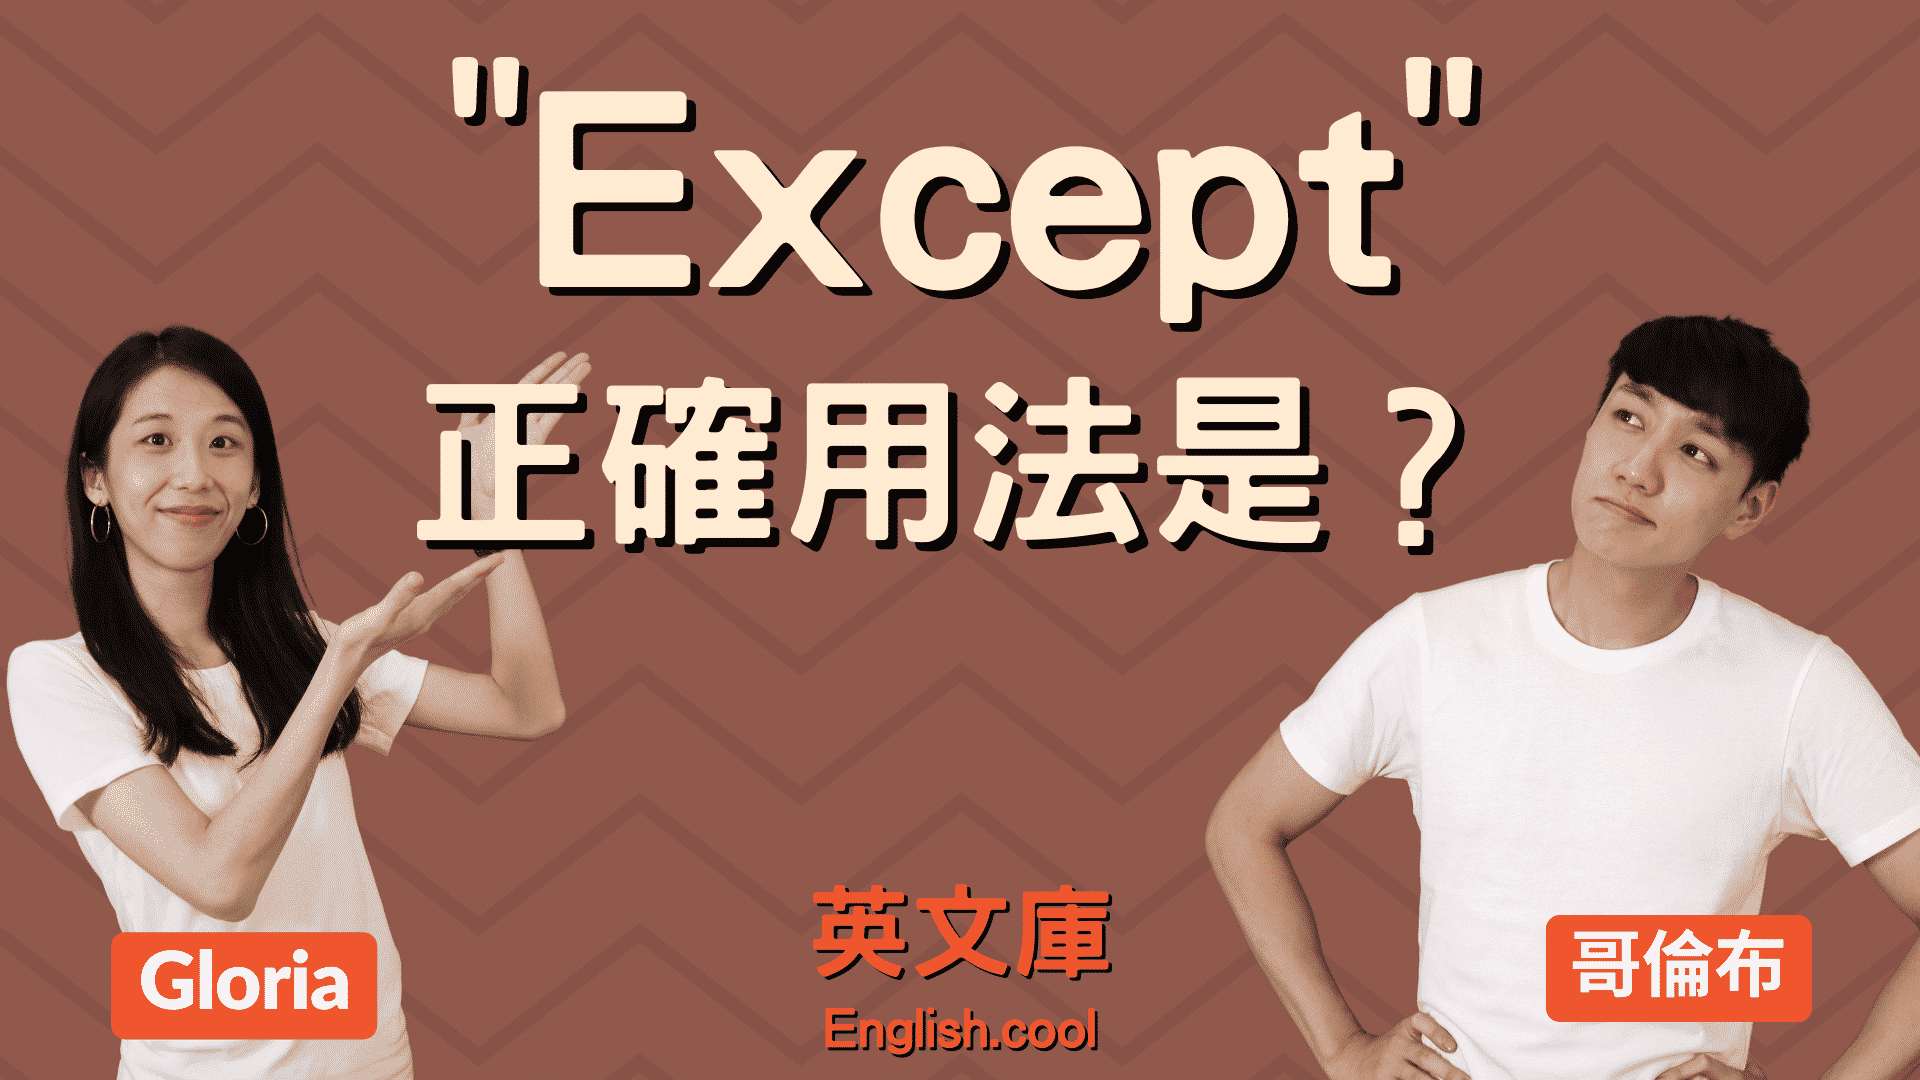 You are currently viewing 「except」正確用法是？來看例句搞懂！